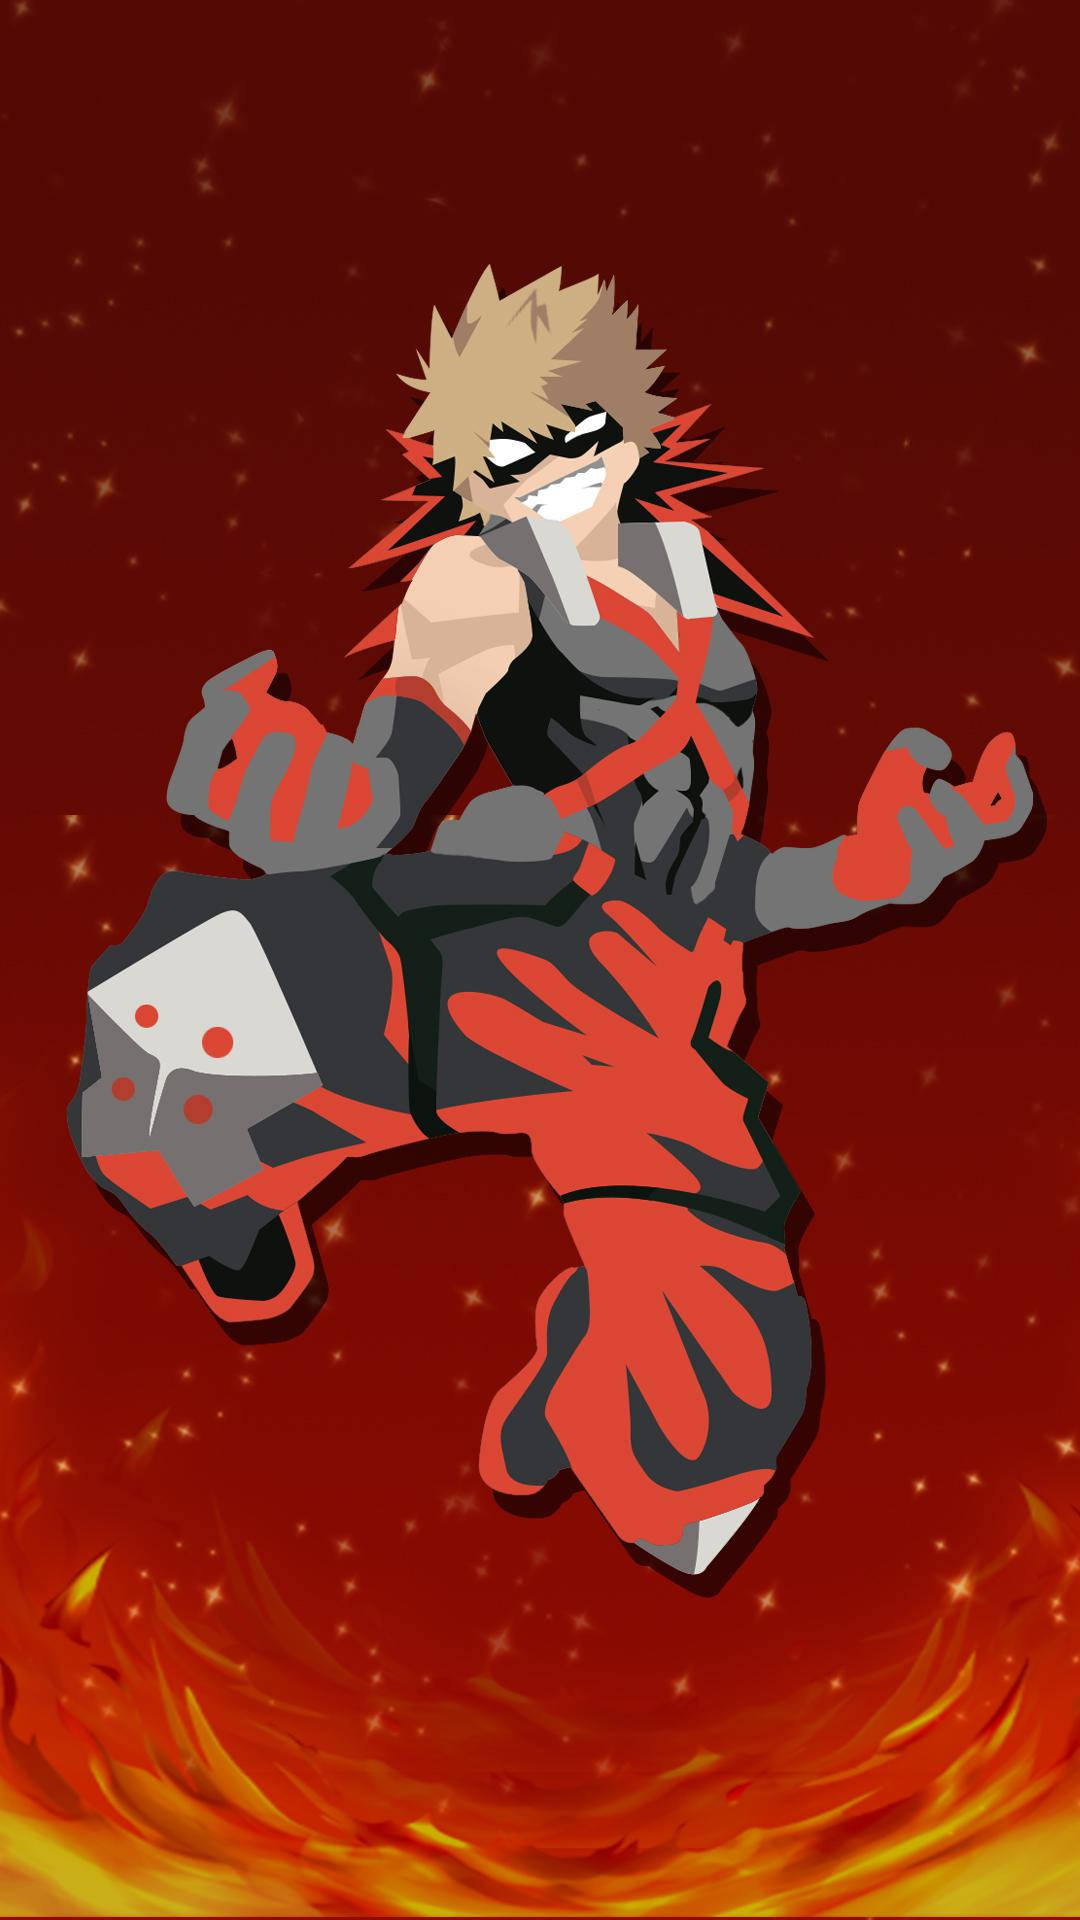 Follow The Lead Of Fan-favorite Bakugou Katsuki With This Cute Outfit Inspired By The My Hero Academia! Background